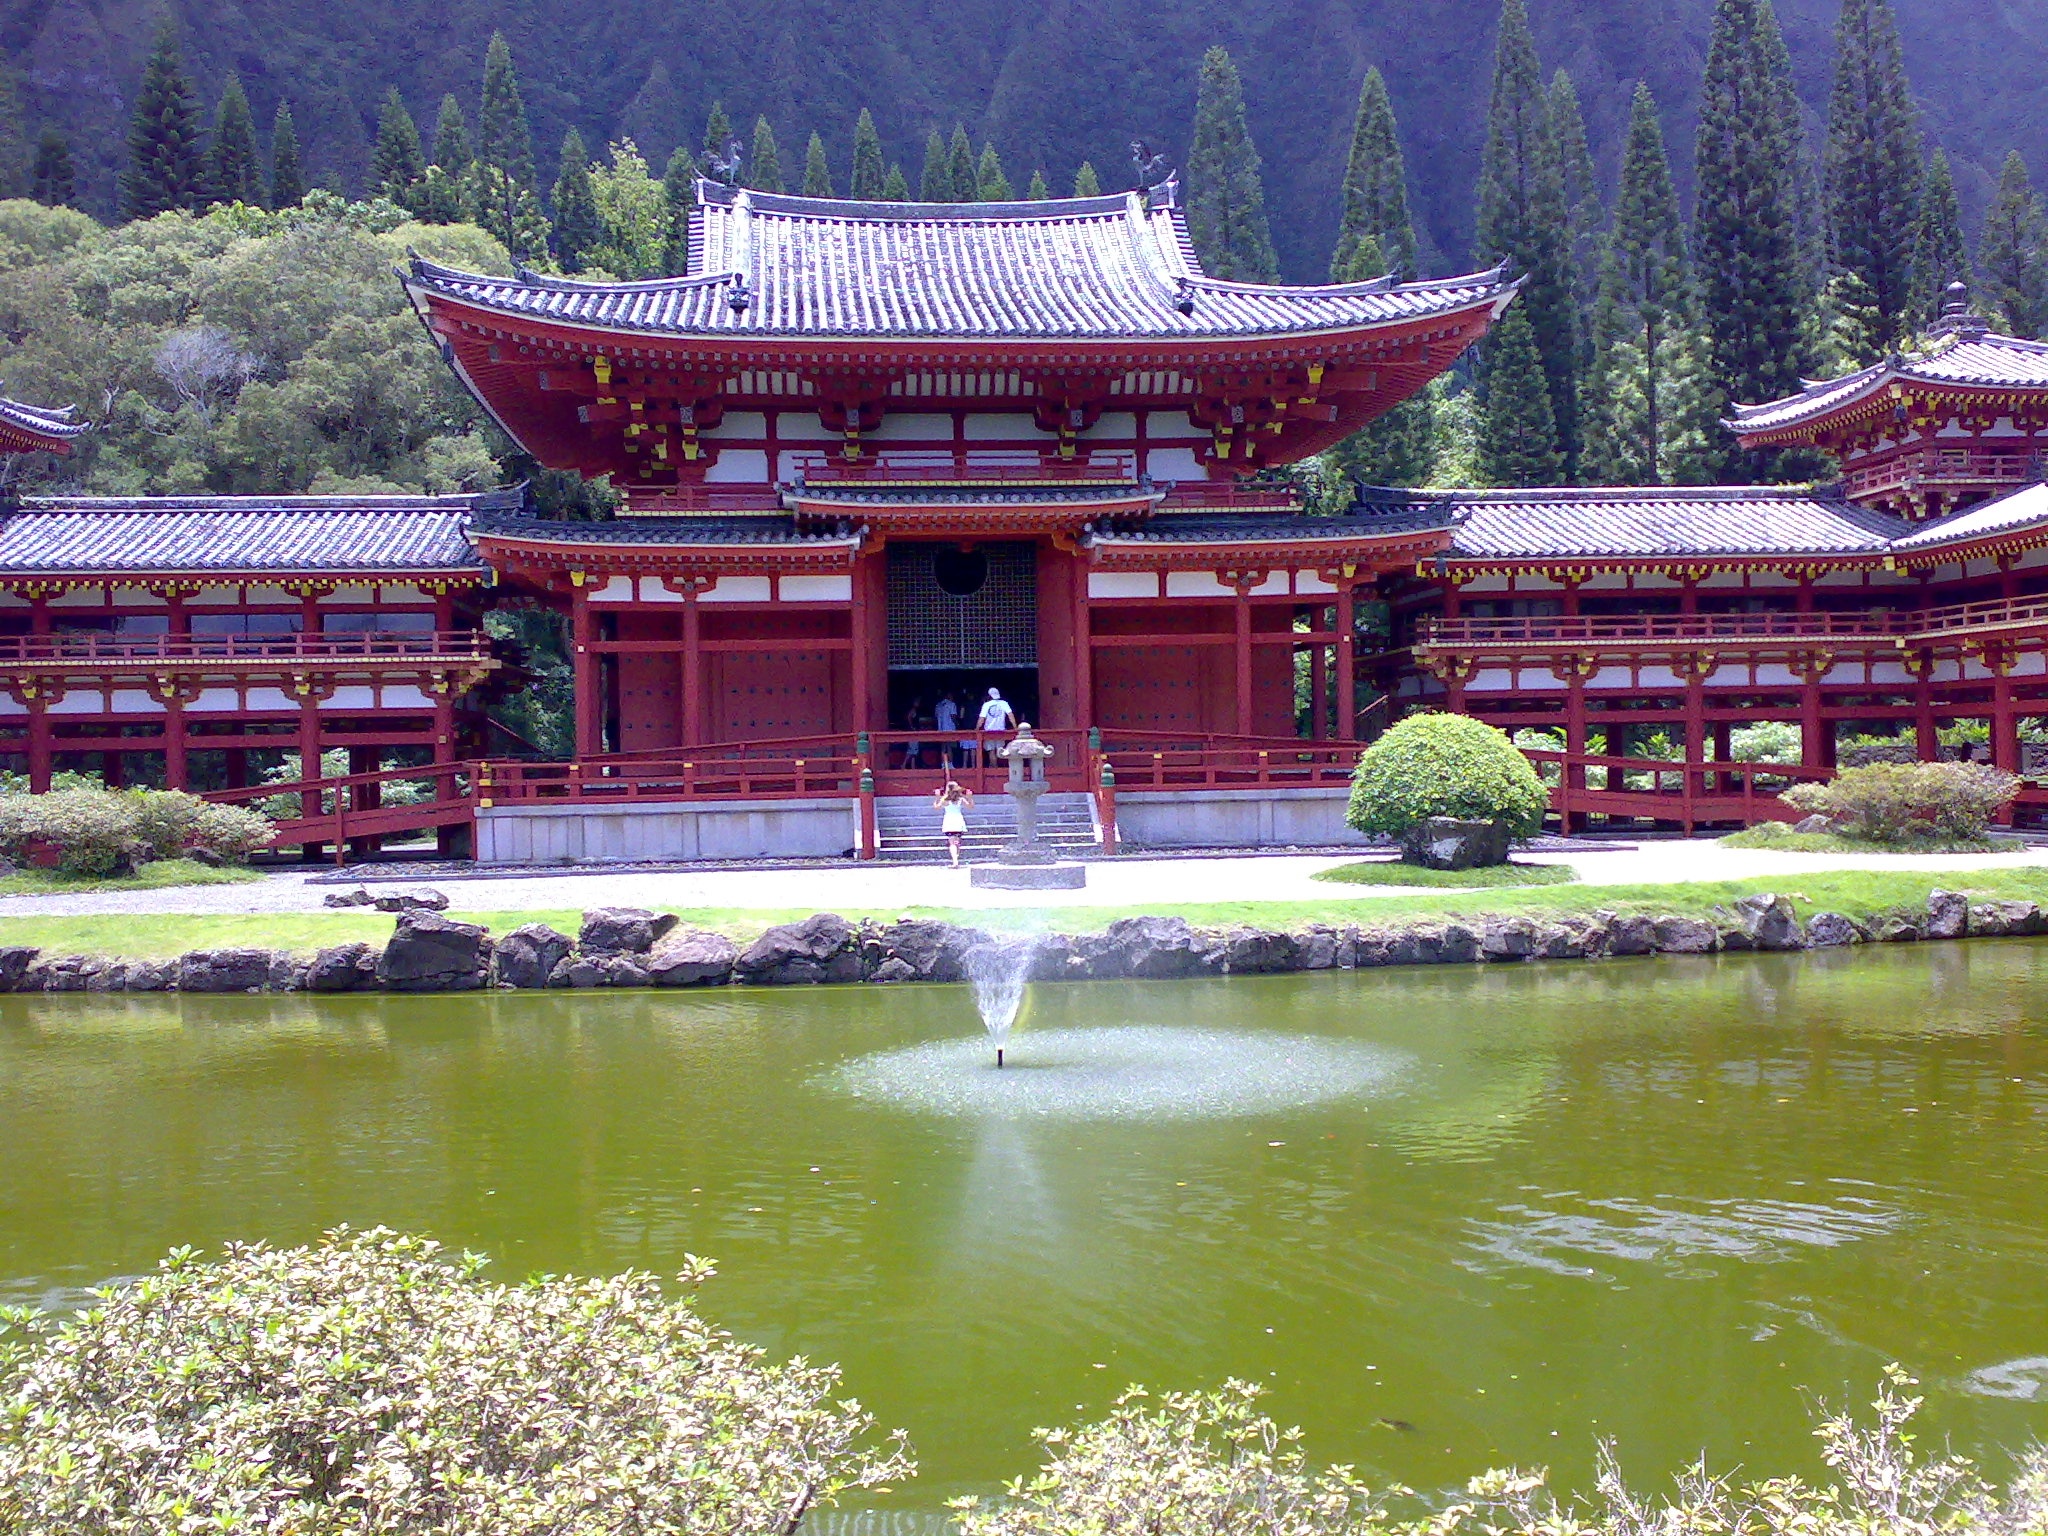 a big red pagoda in the middle of a pond